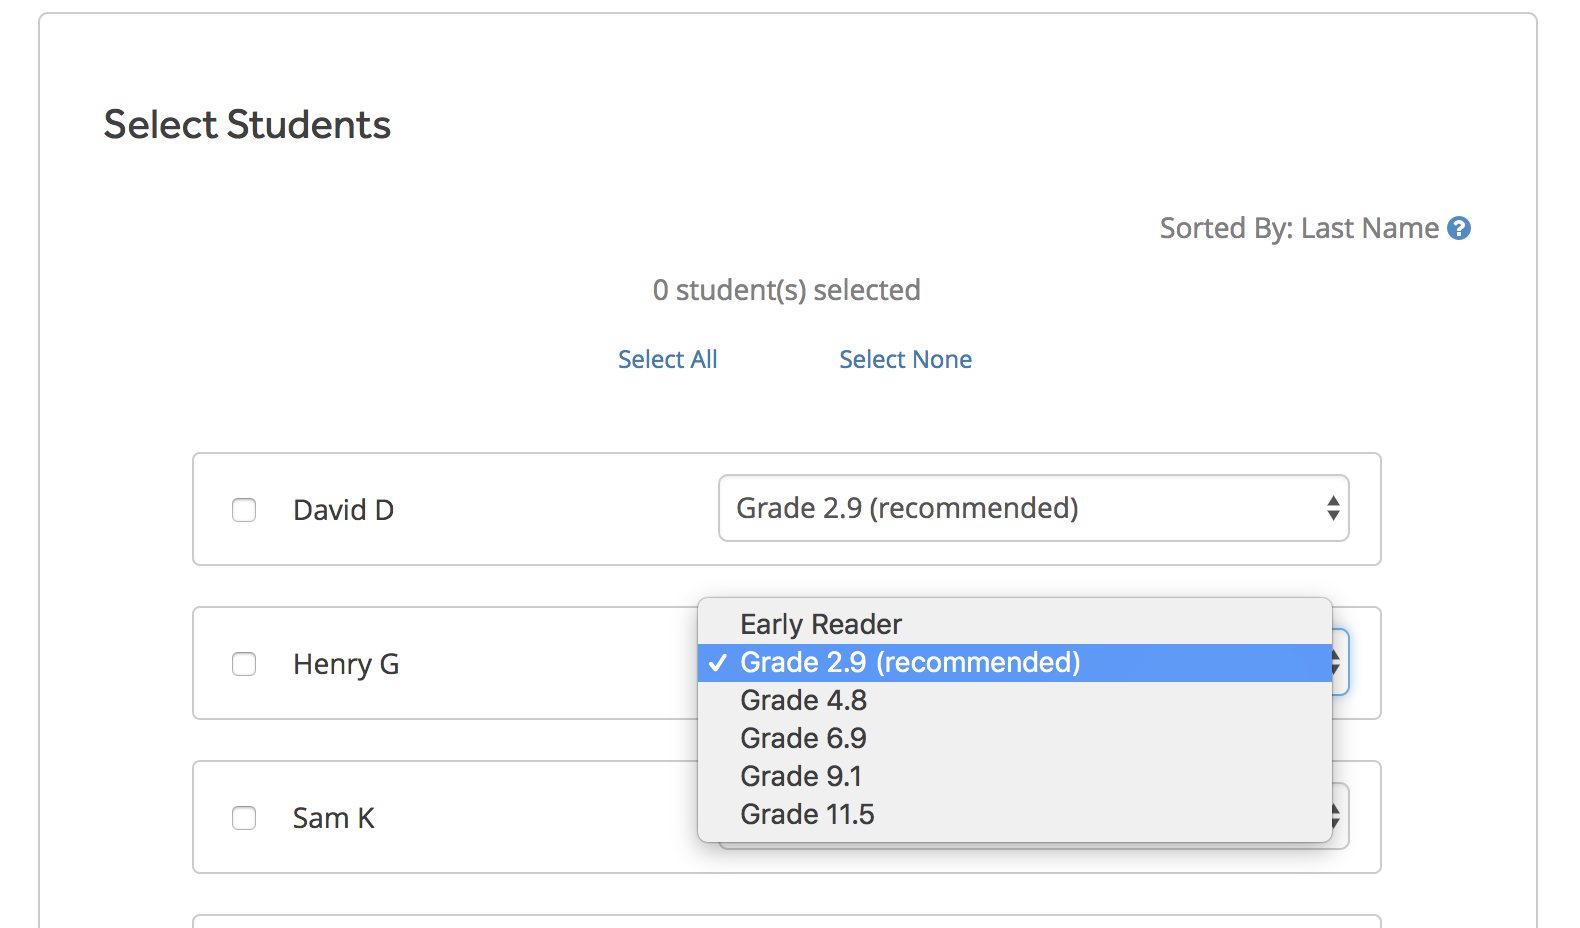 The grade recommendation drop-down list is shown for one student. Grade 2.9 is the recommended grade; other grades that can be selected are included in the list.